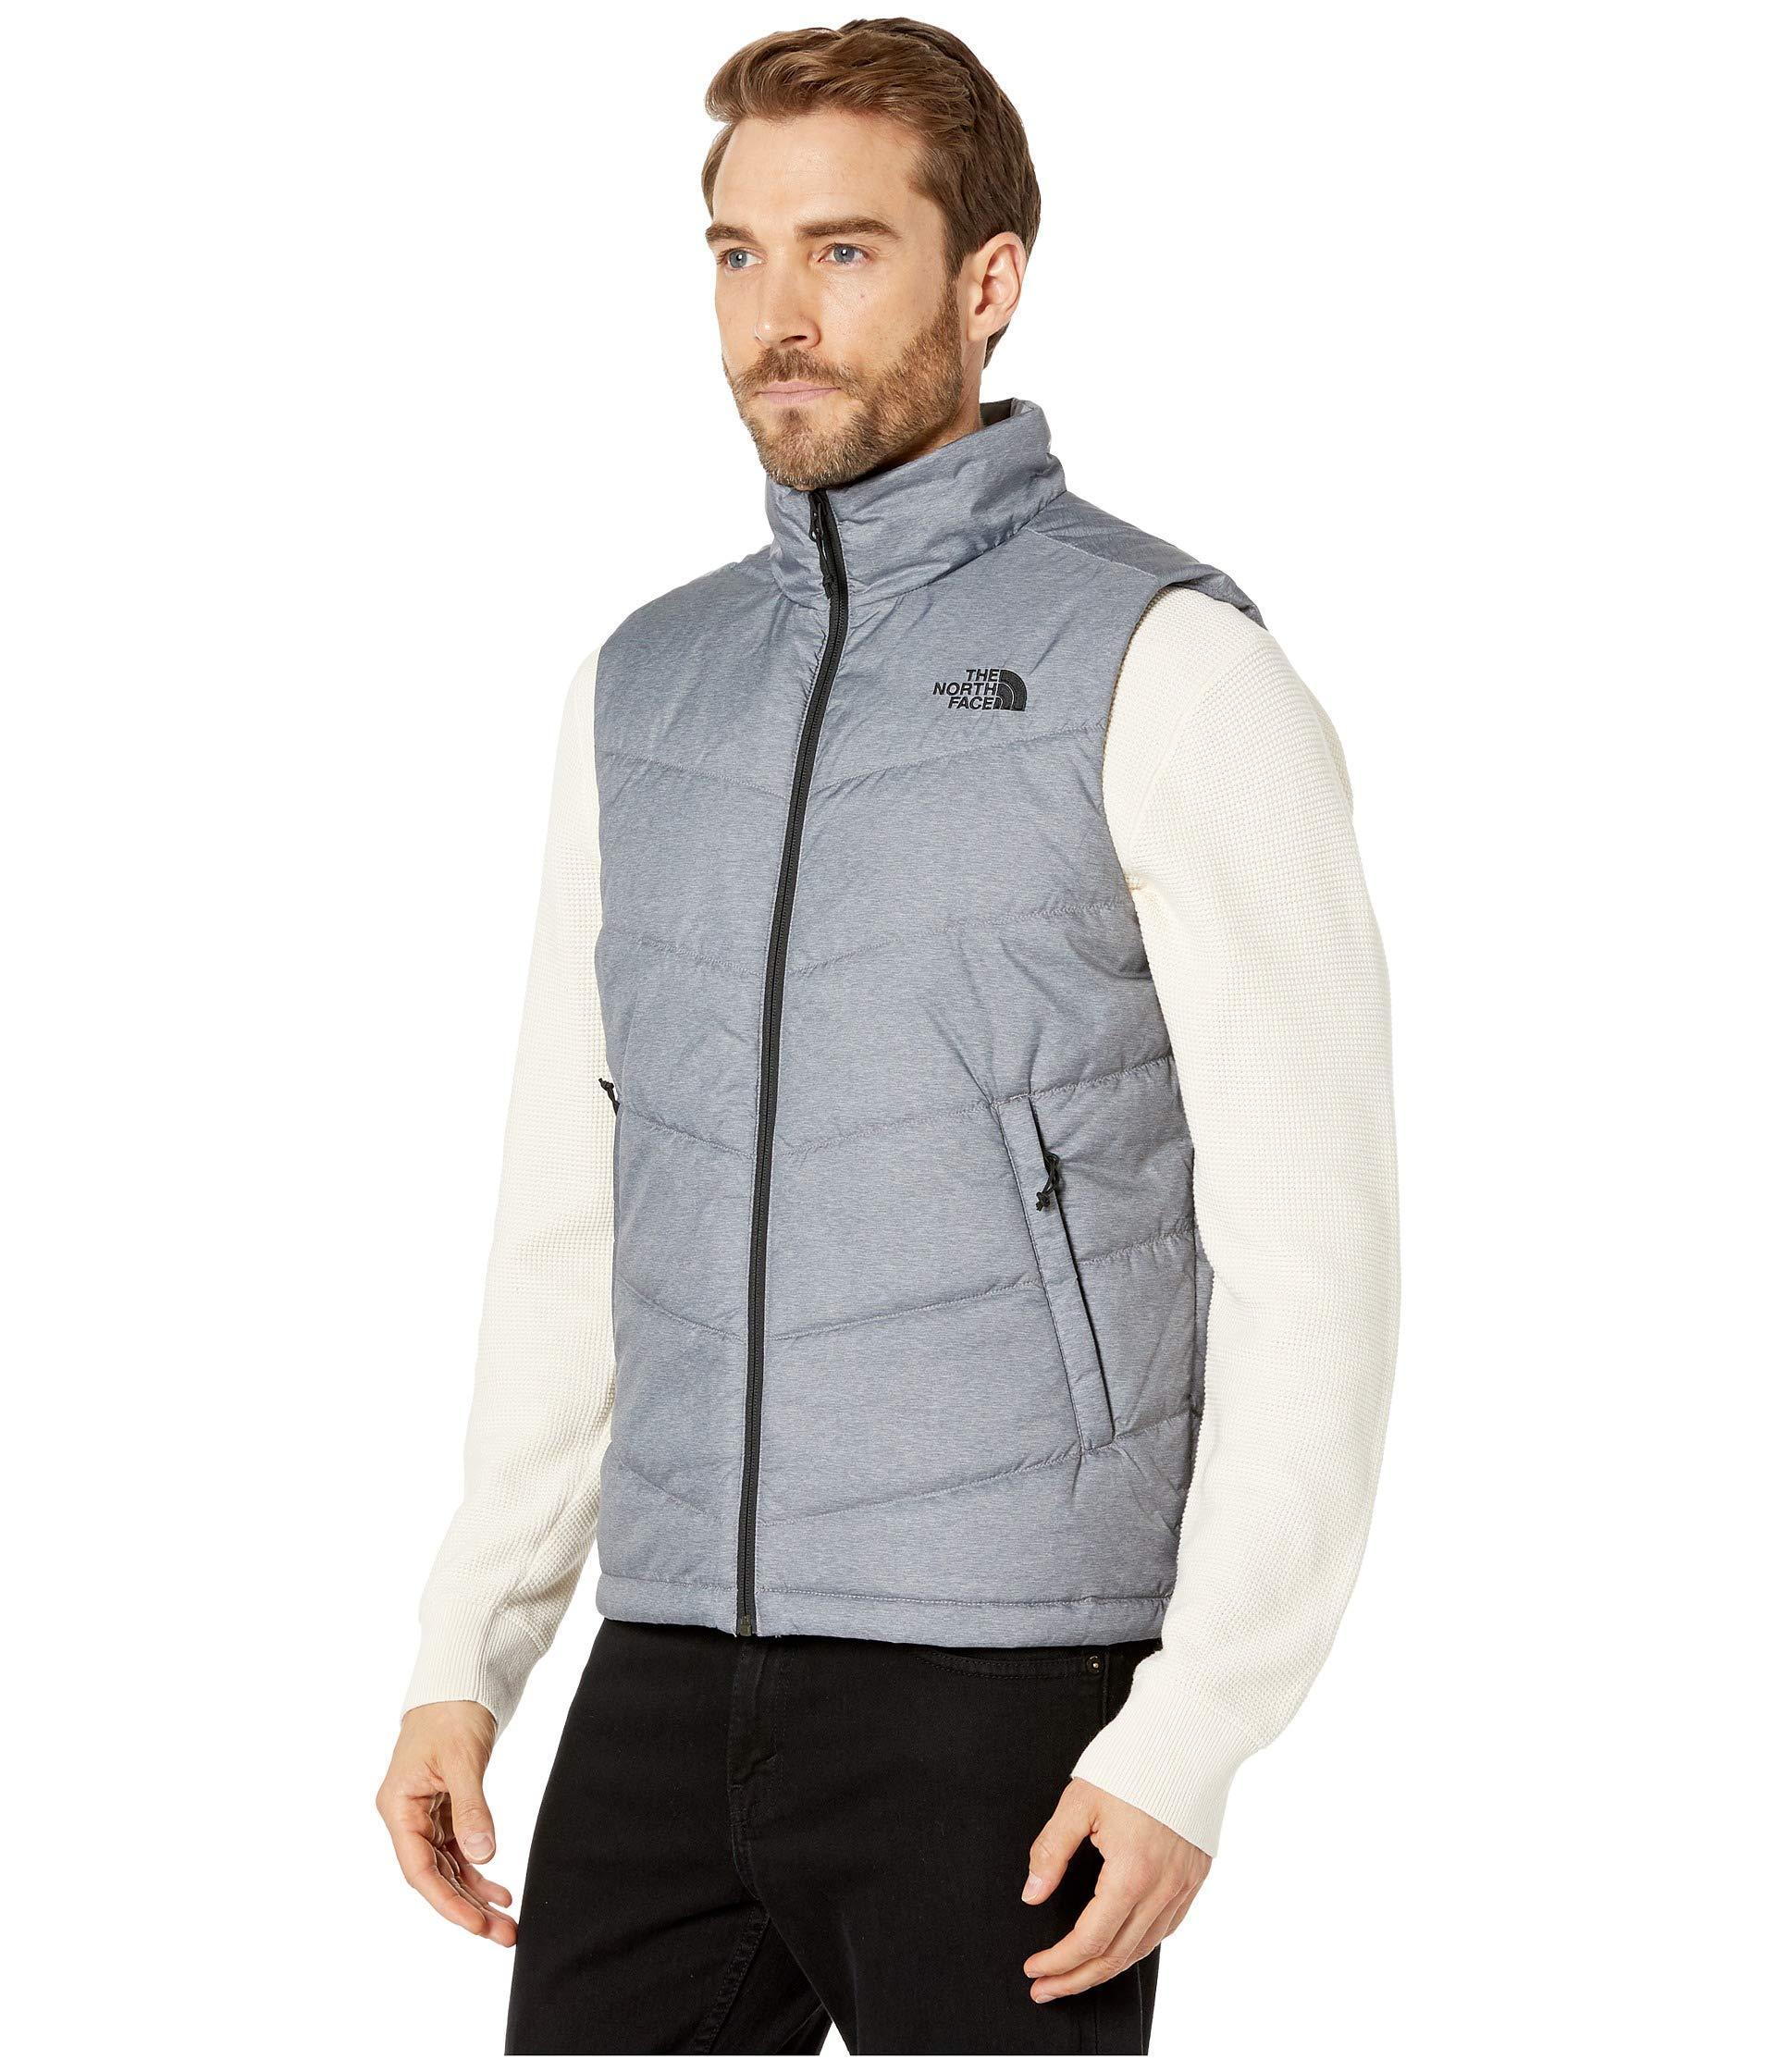 The North Face Synthetic Junction Insulated Vest in Gray for Men - Lyst